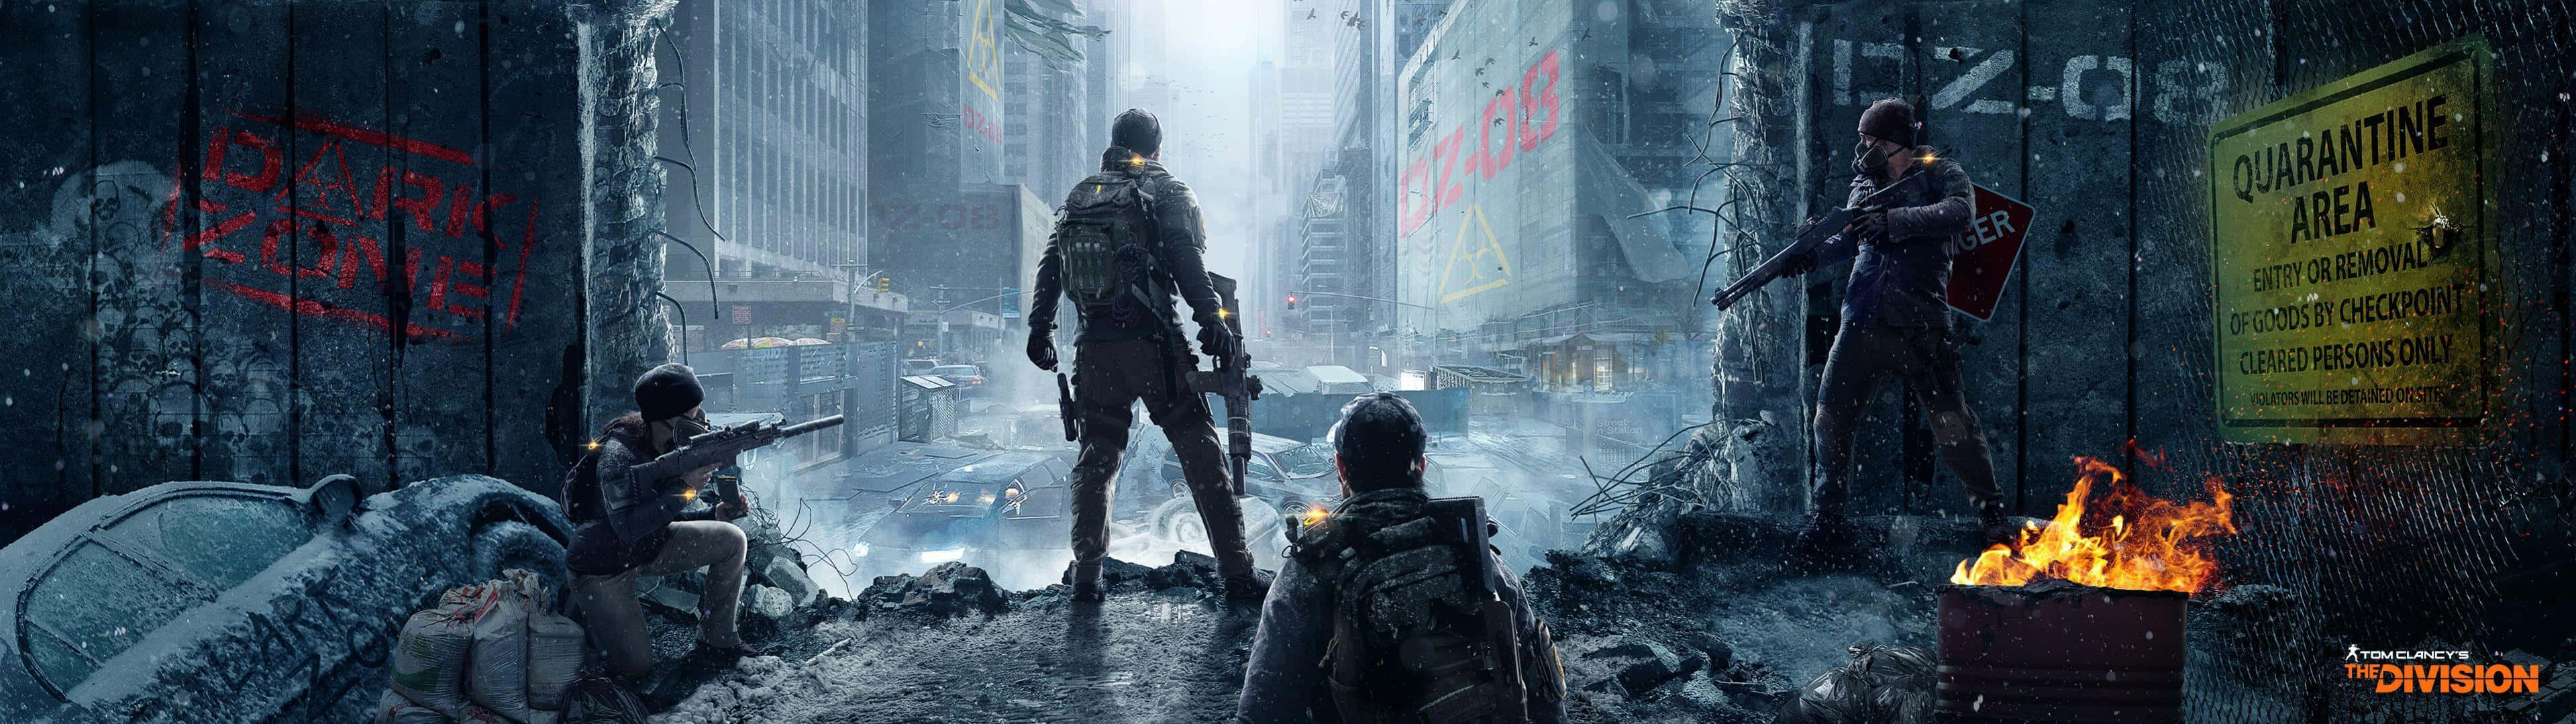 Get ready for action in The Division Desktop Wallpaper